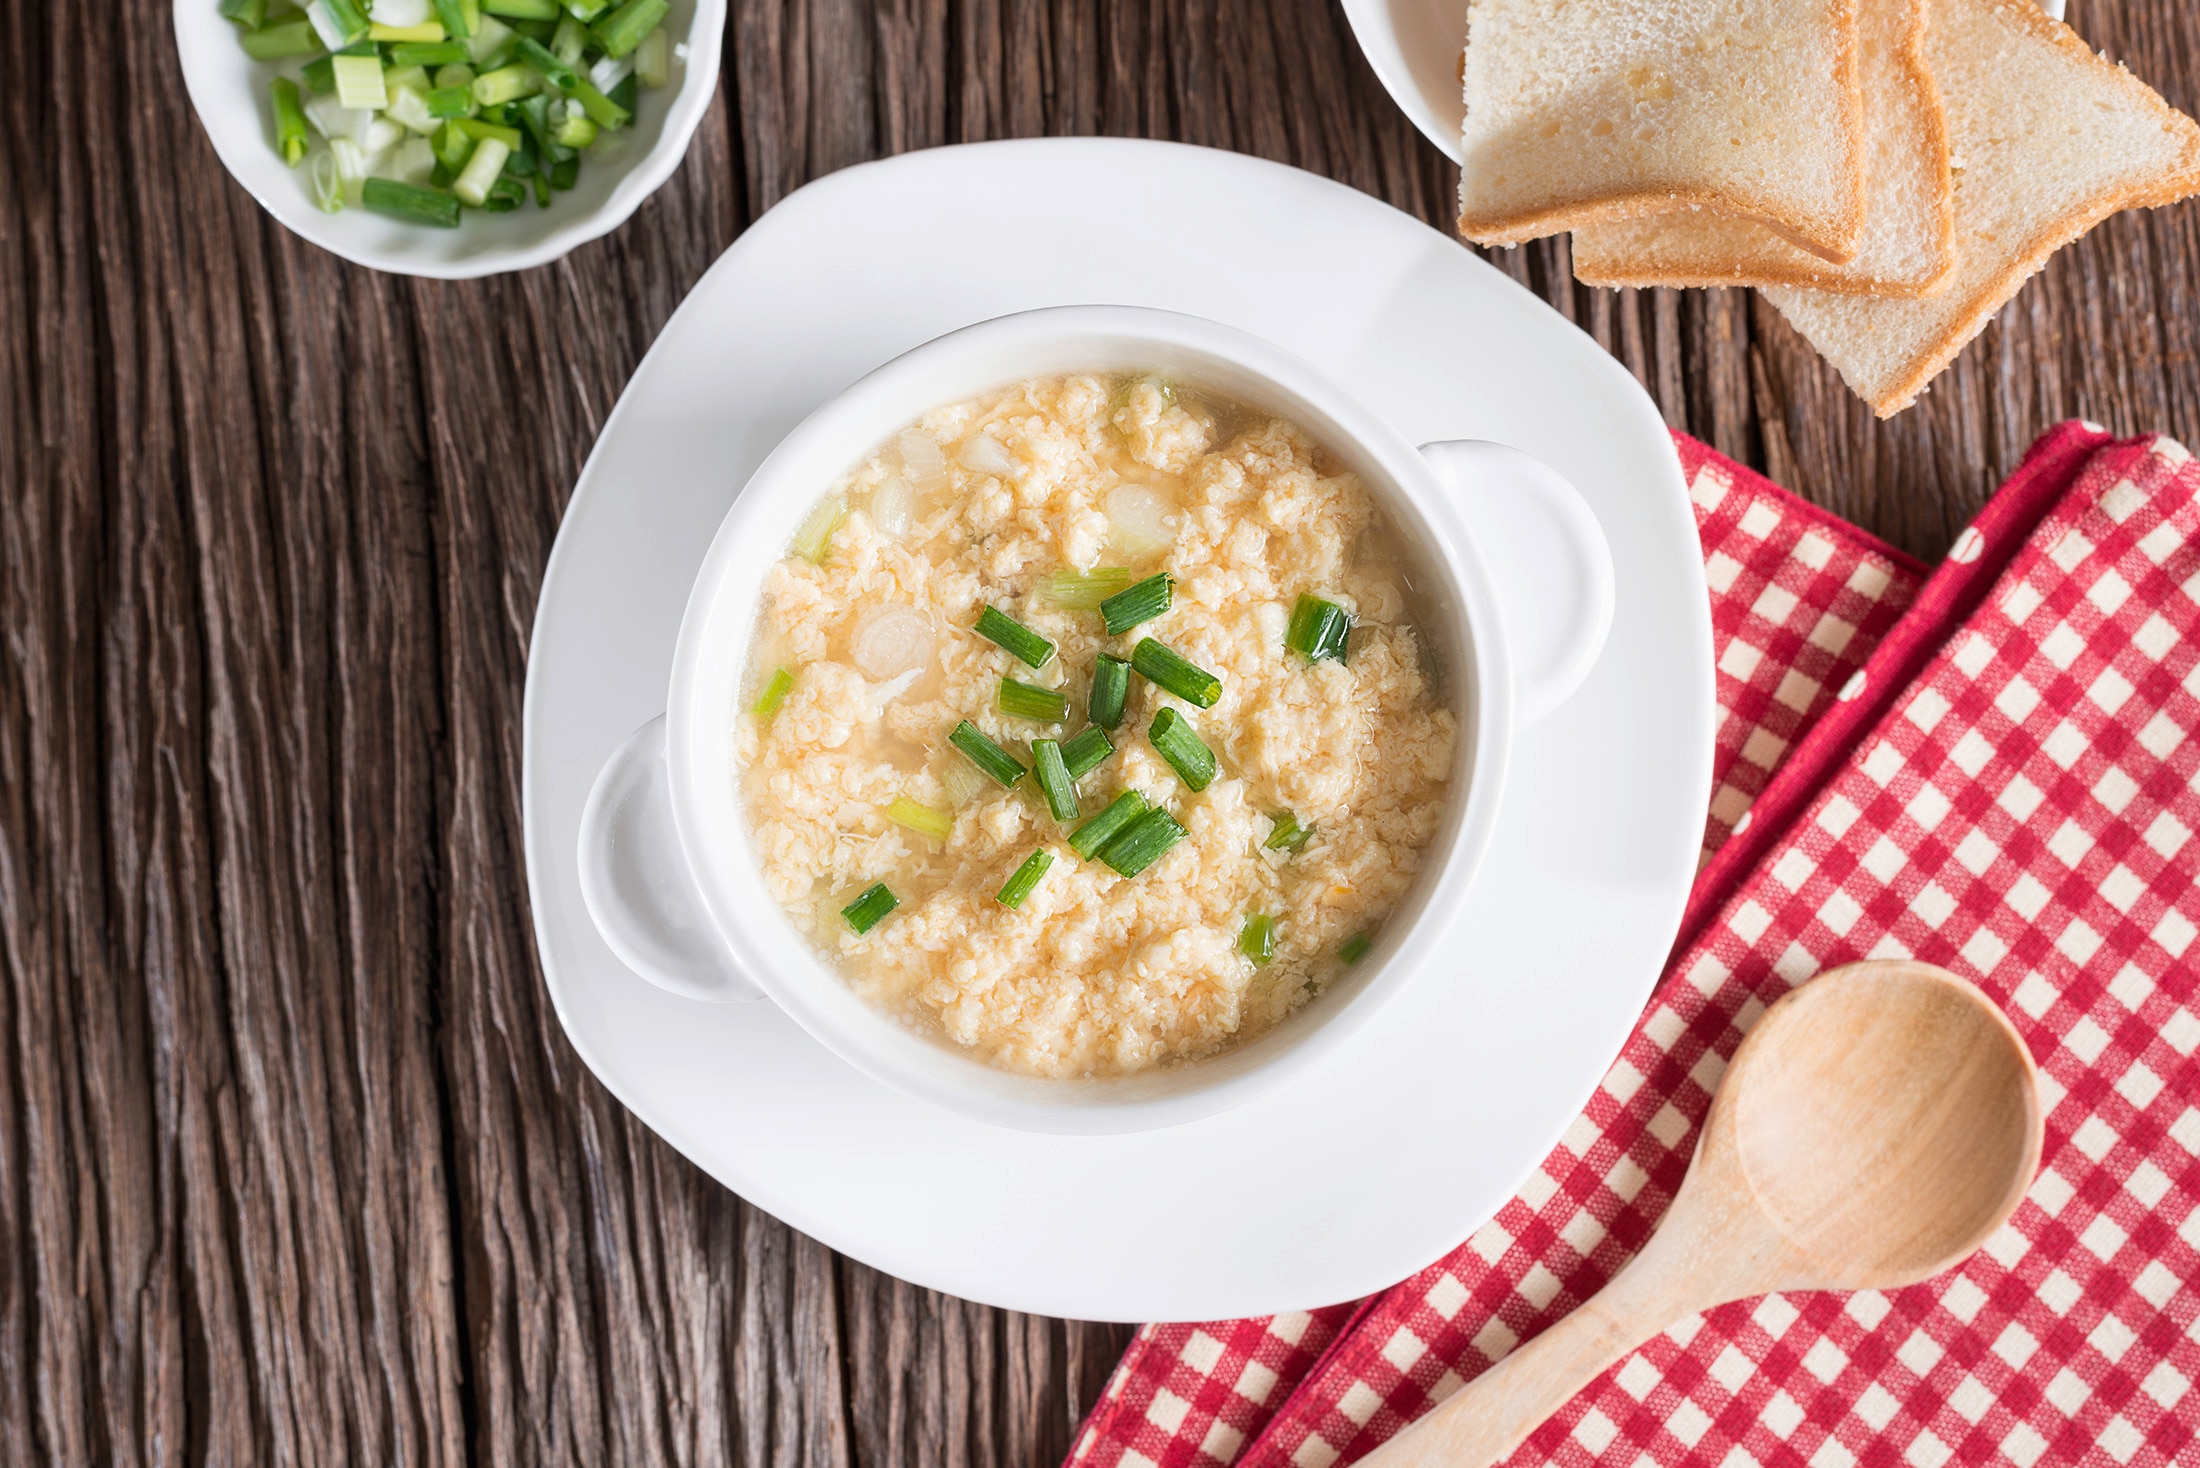 A bowl of egg drop soup garnished with scallions